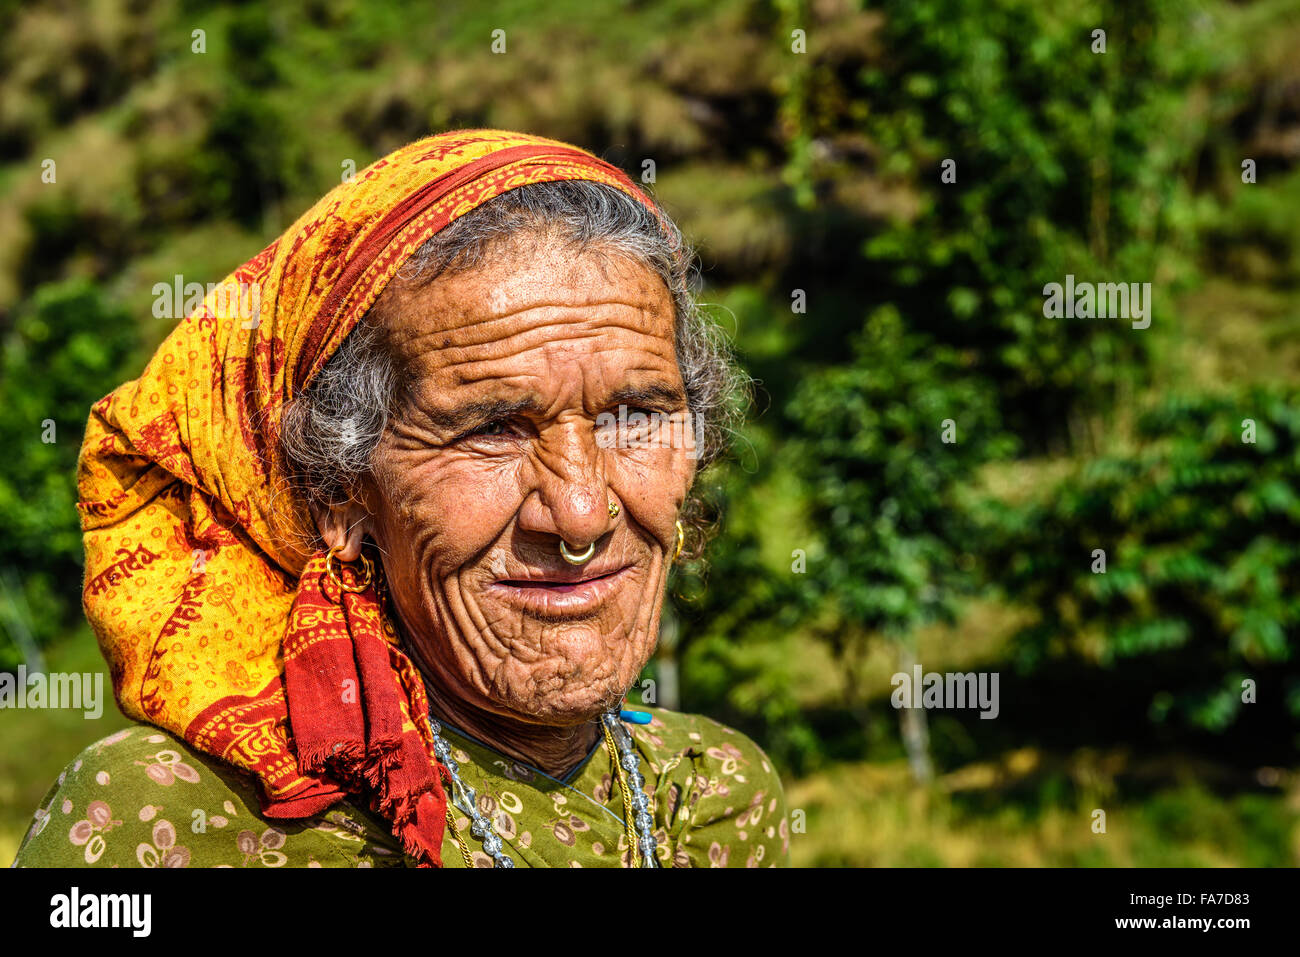 Portrait of a very old farmer woman Stock Photo